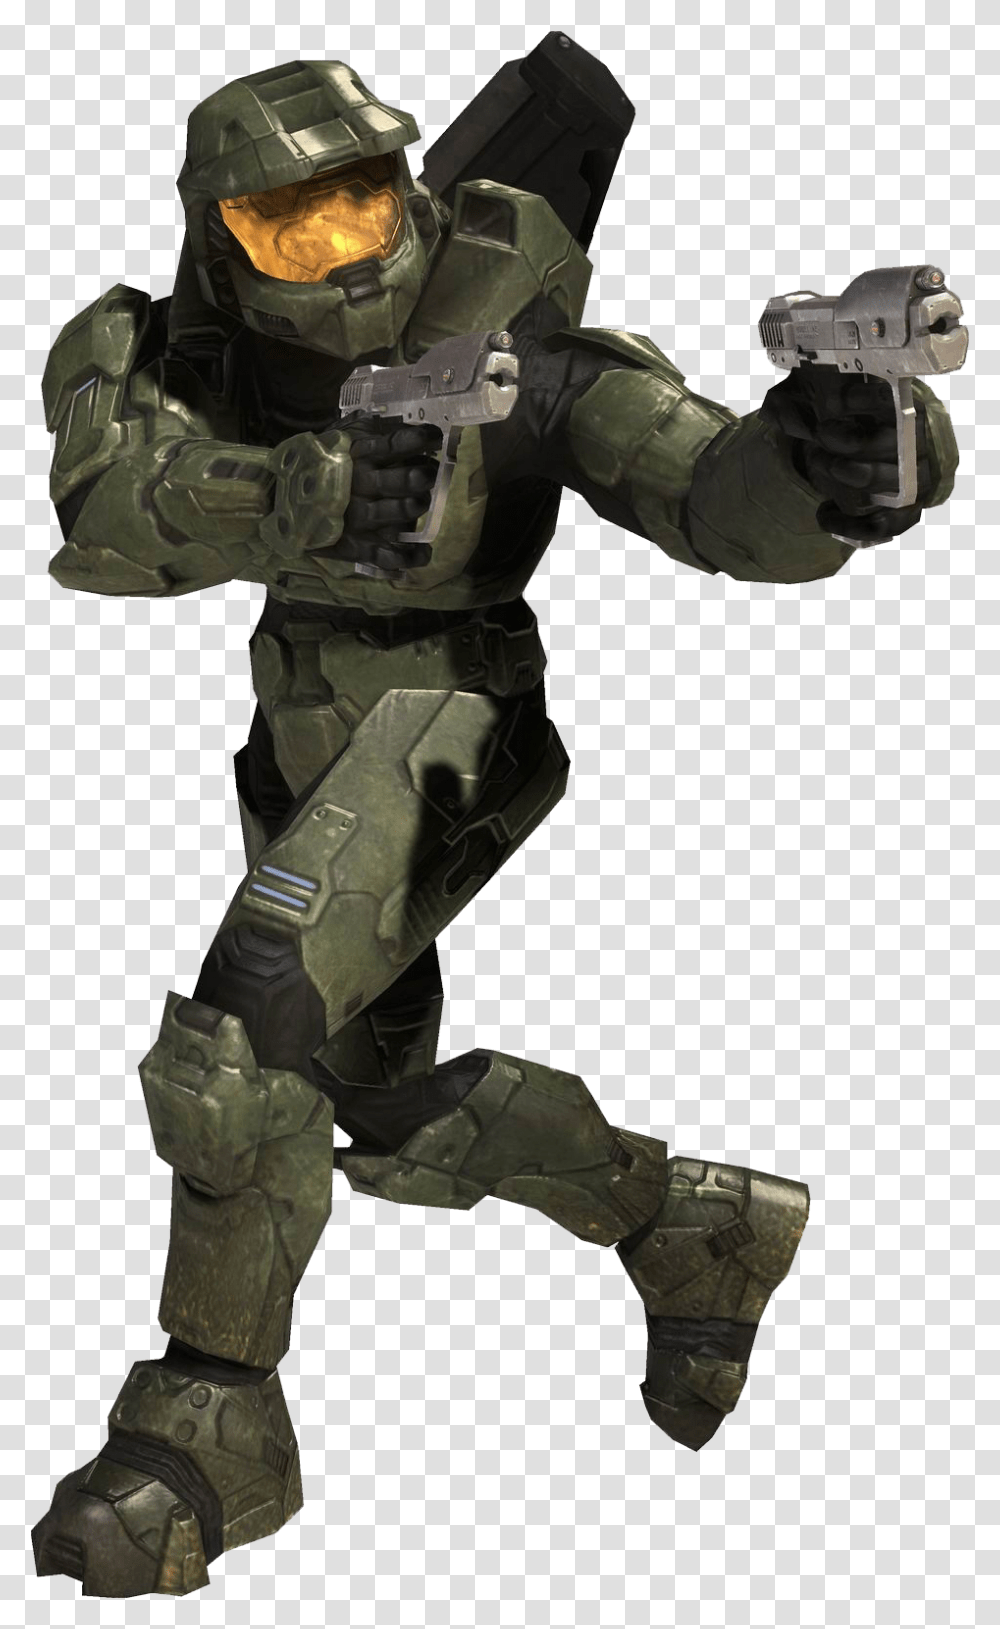 Master Chief Image Halo Master Chief Halo, Person, Helmet, Military Uniform Transparent Png